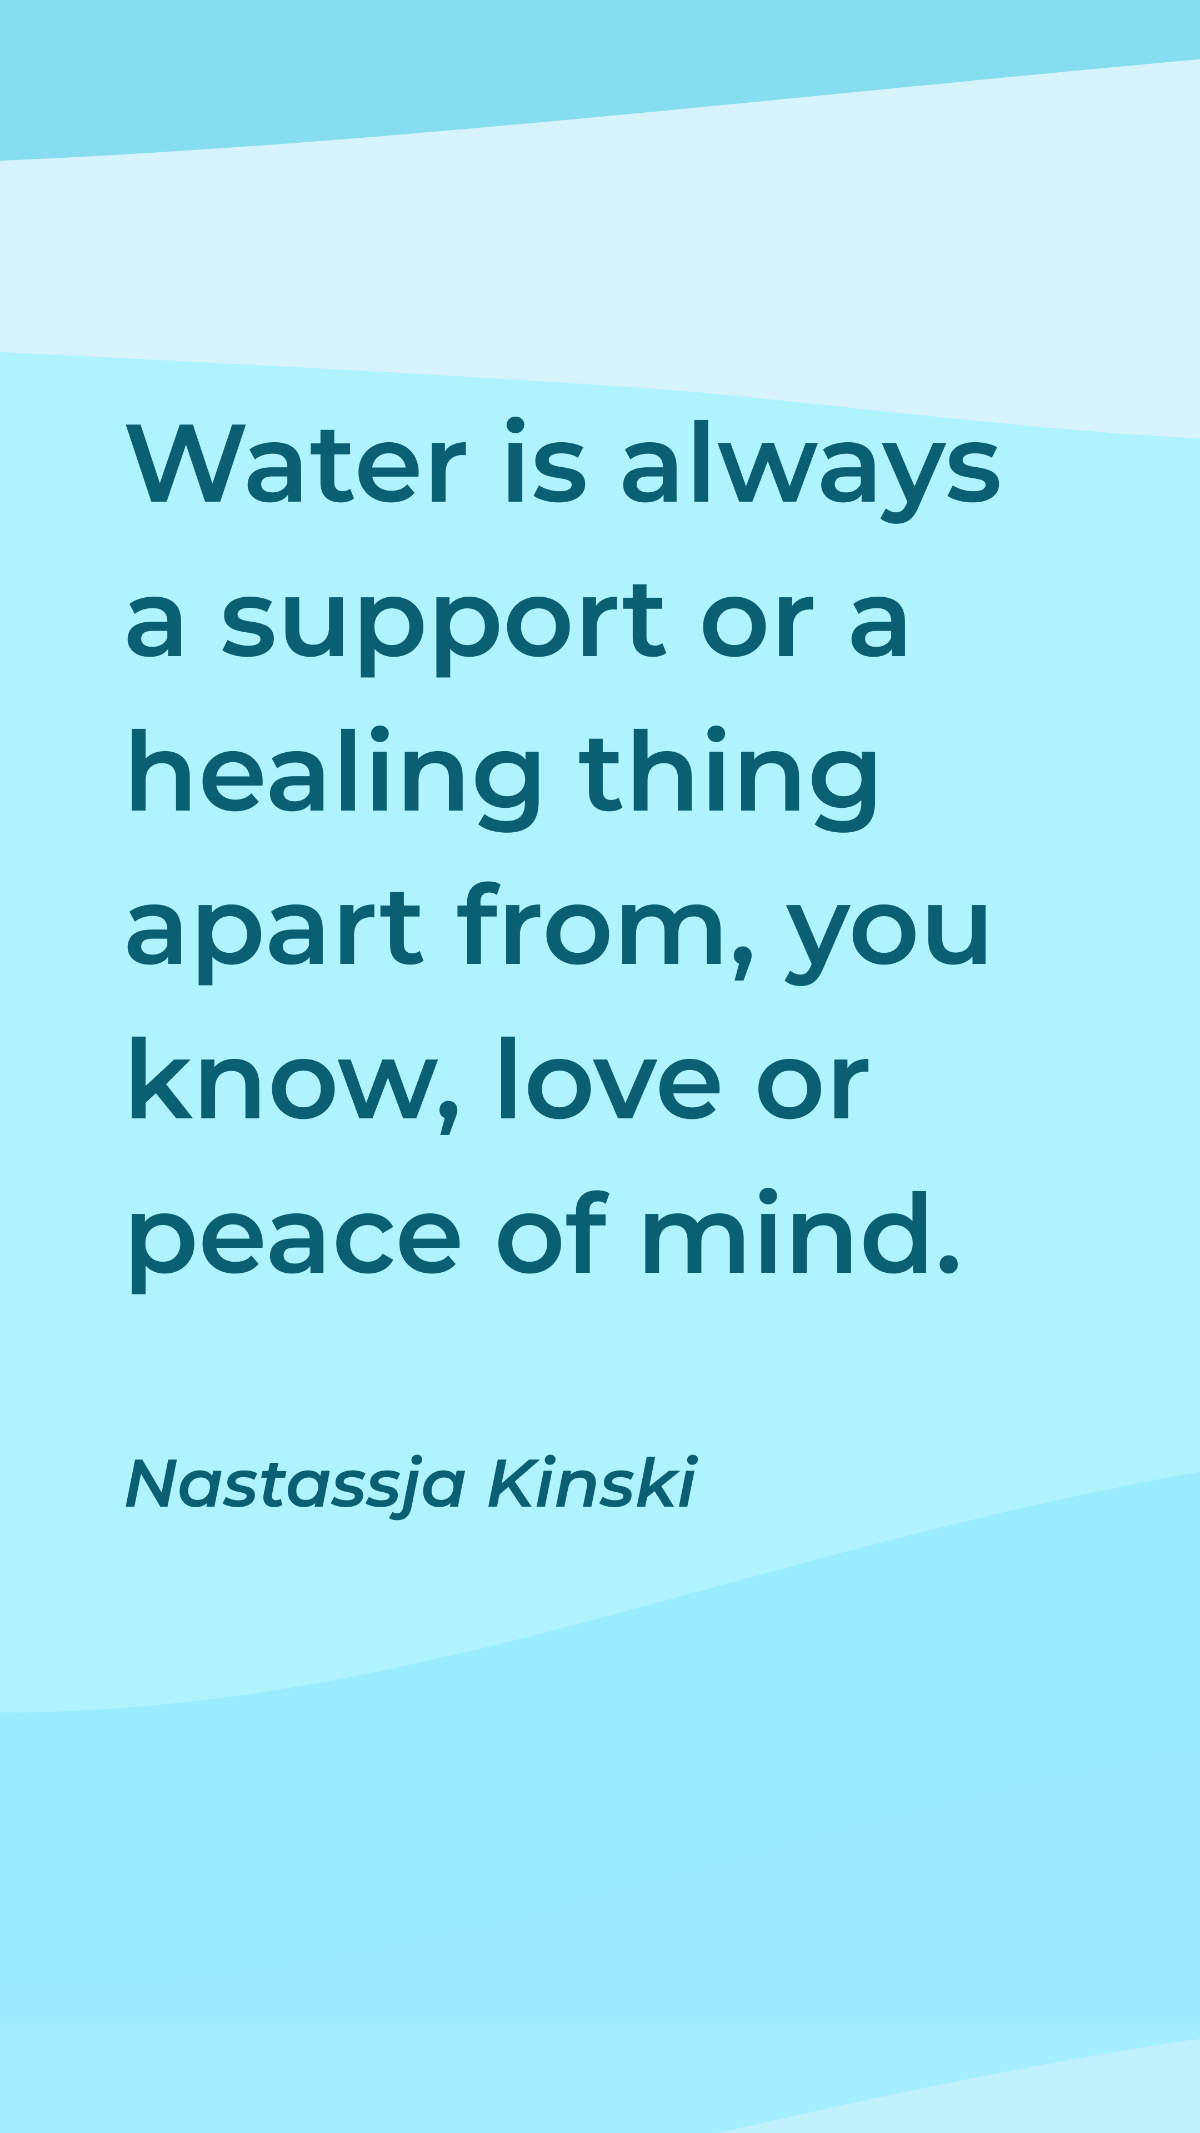 Nastassja Kinski - Water is always a support or a healing thing apart from, you know, love or peace of mind. Template